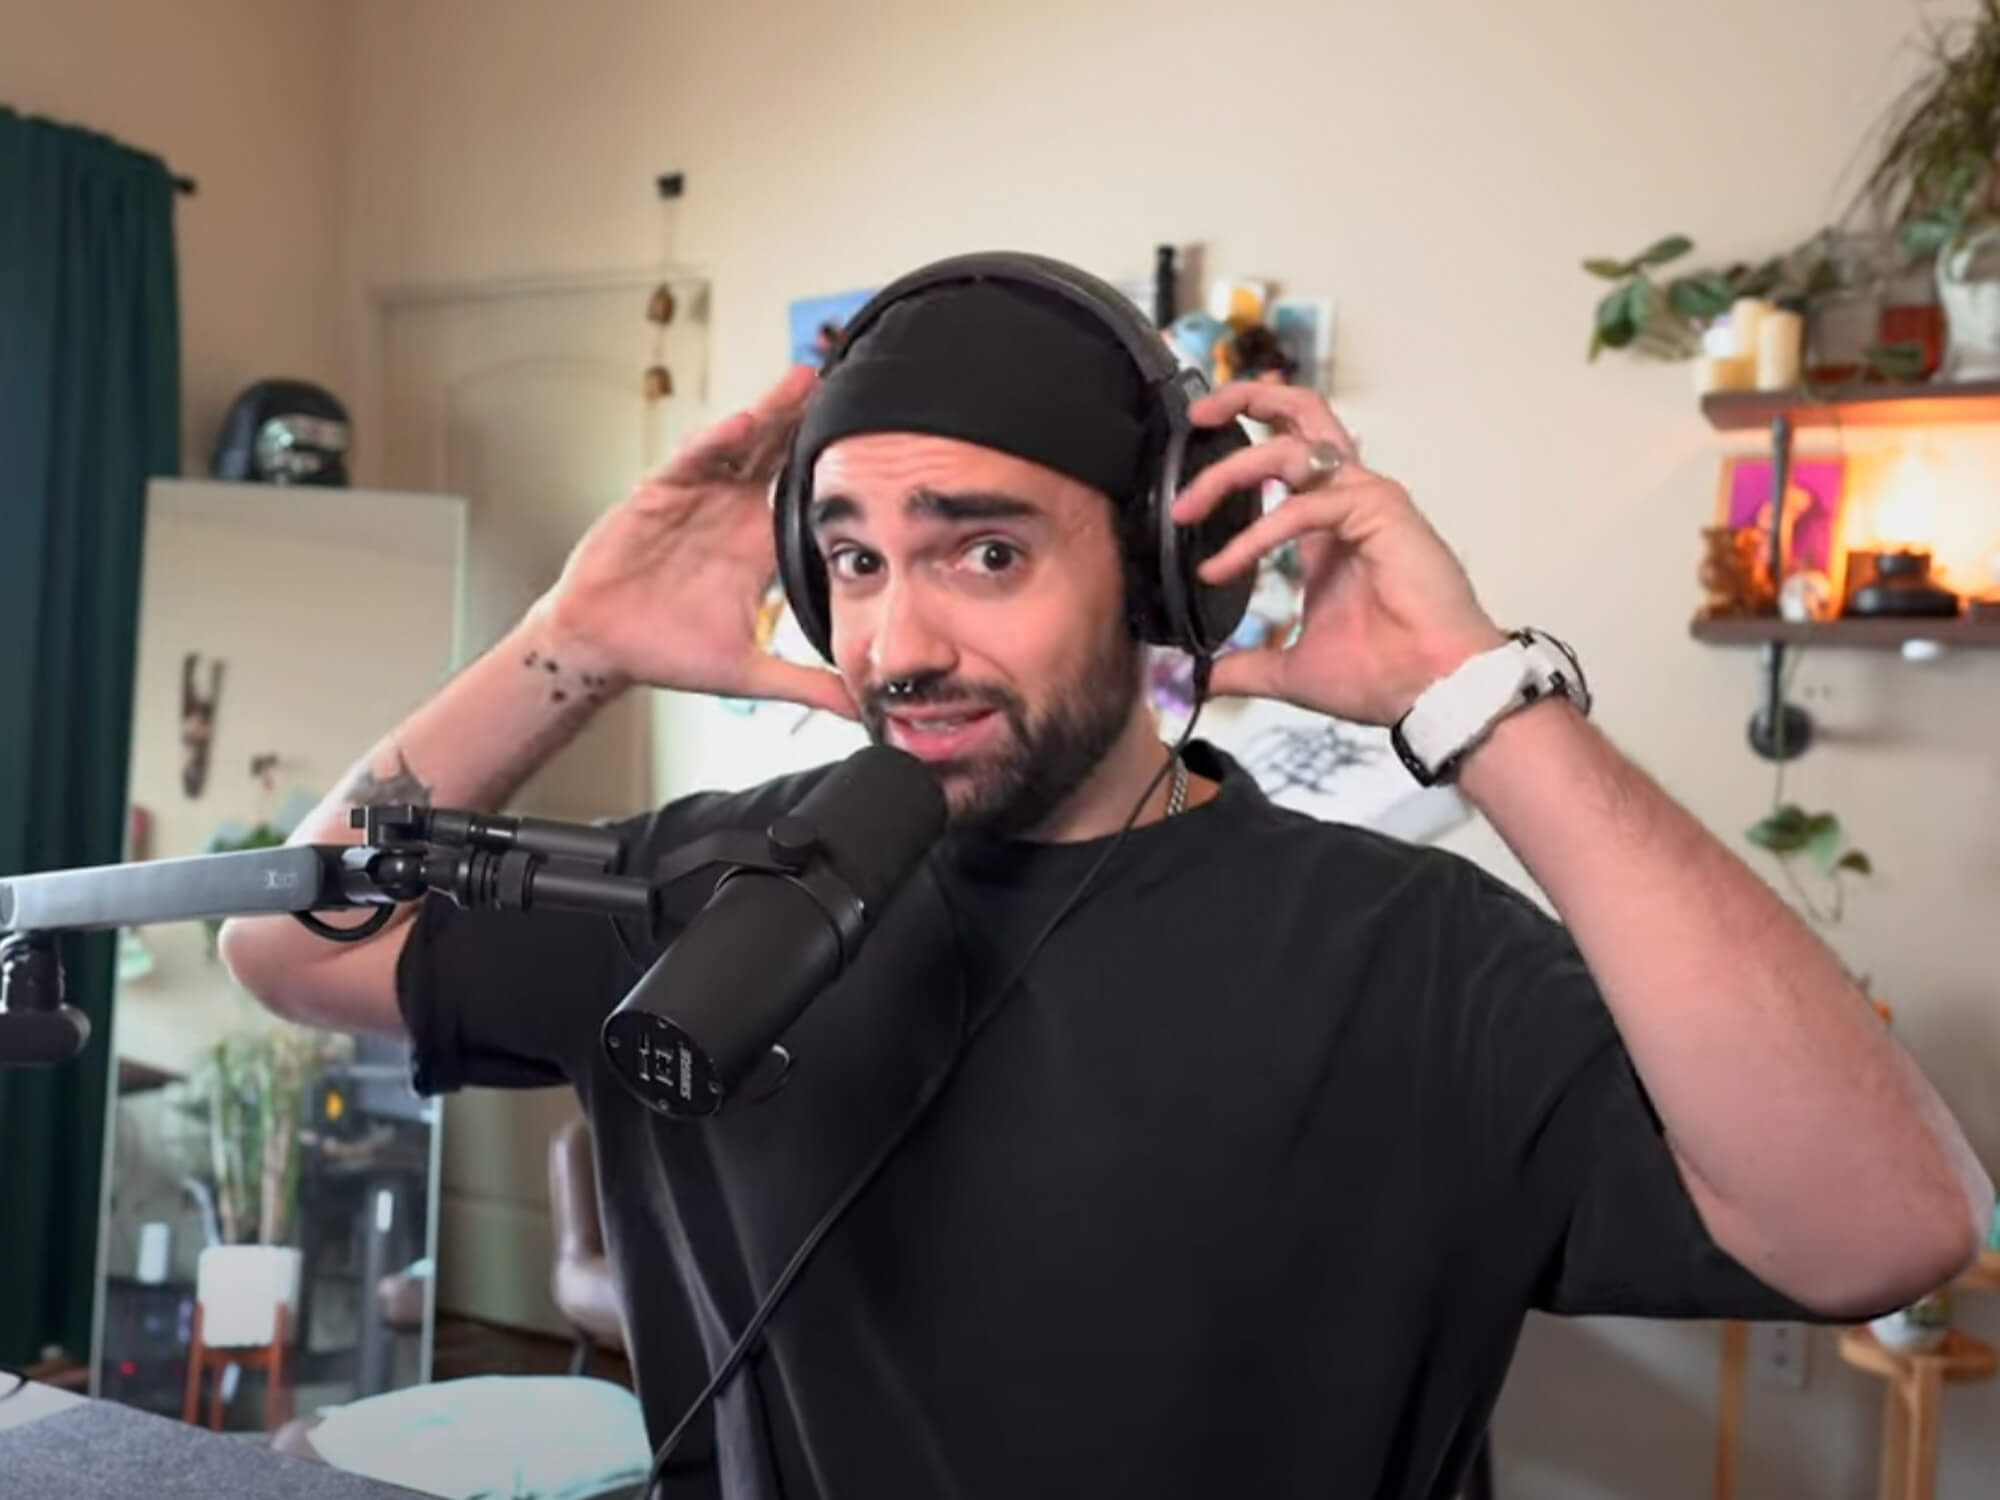 TAETRO in his YouTube video. He is placing headphones on his head and looks skeptical. He's wearing a black t-shirt and black beanie hat.